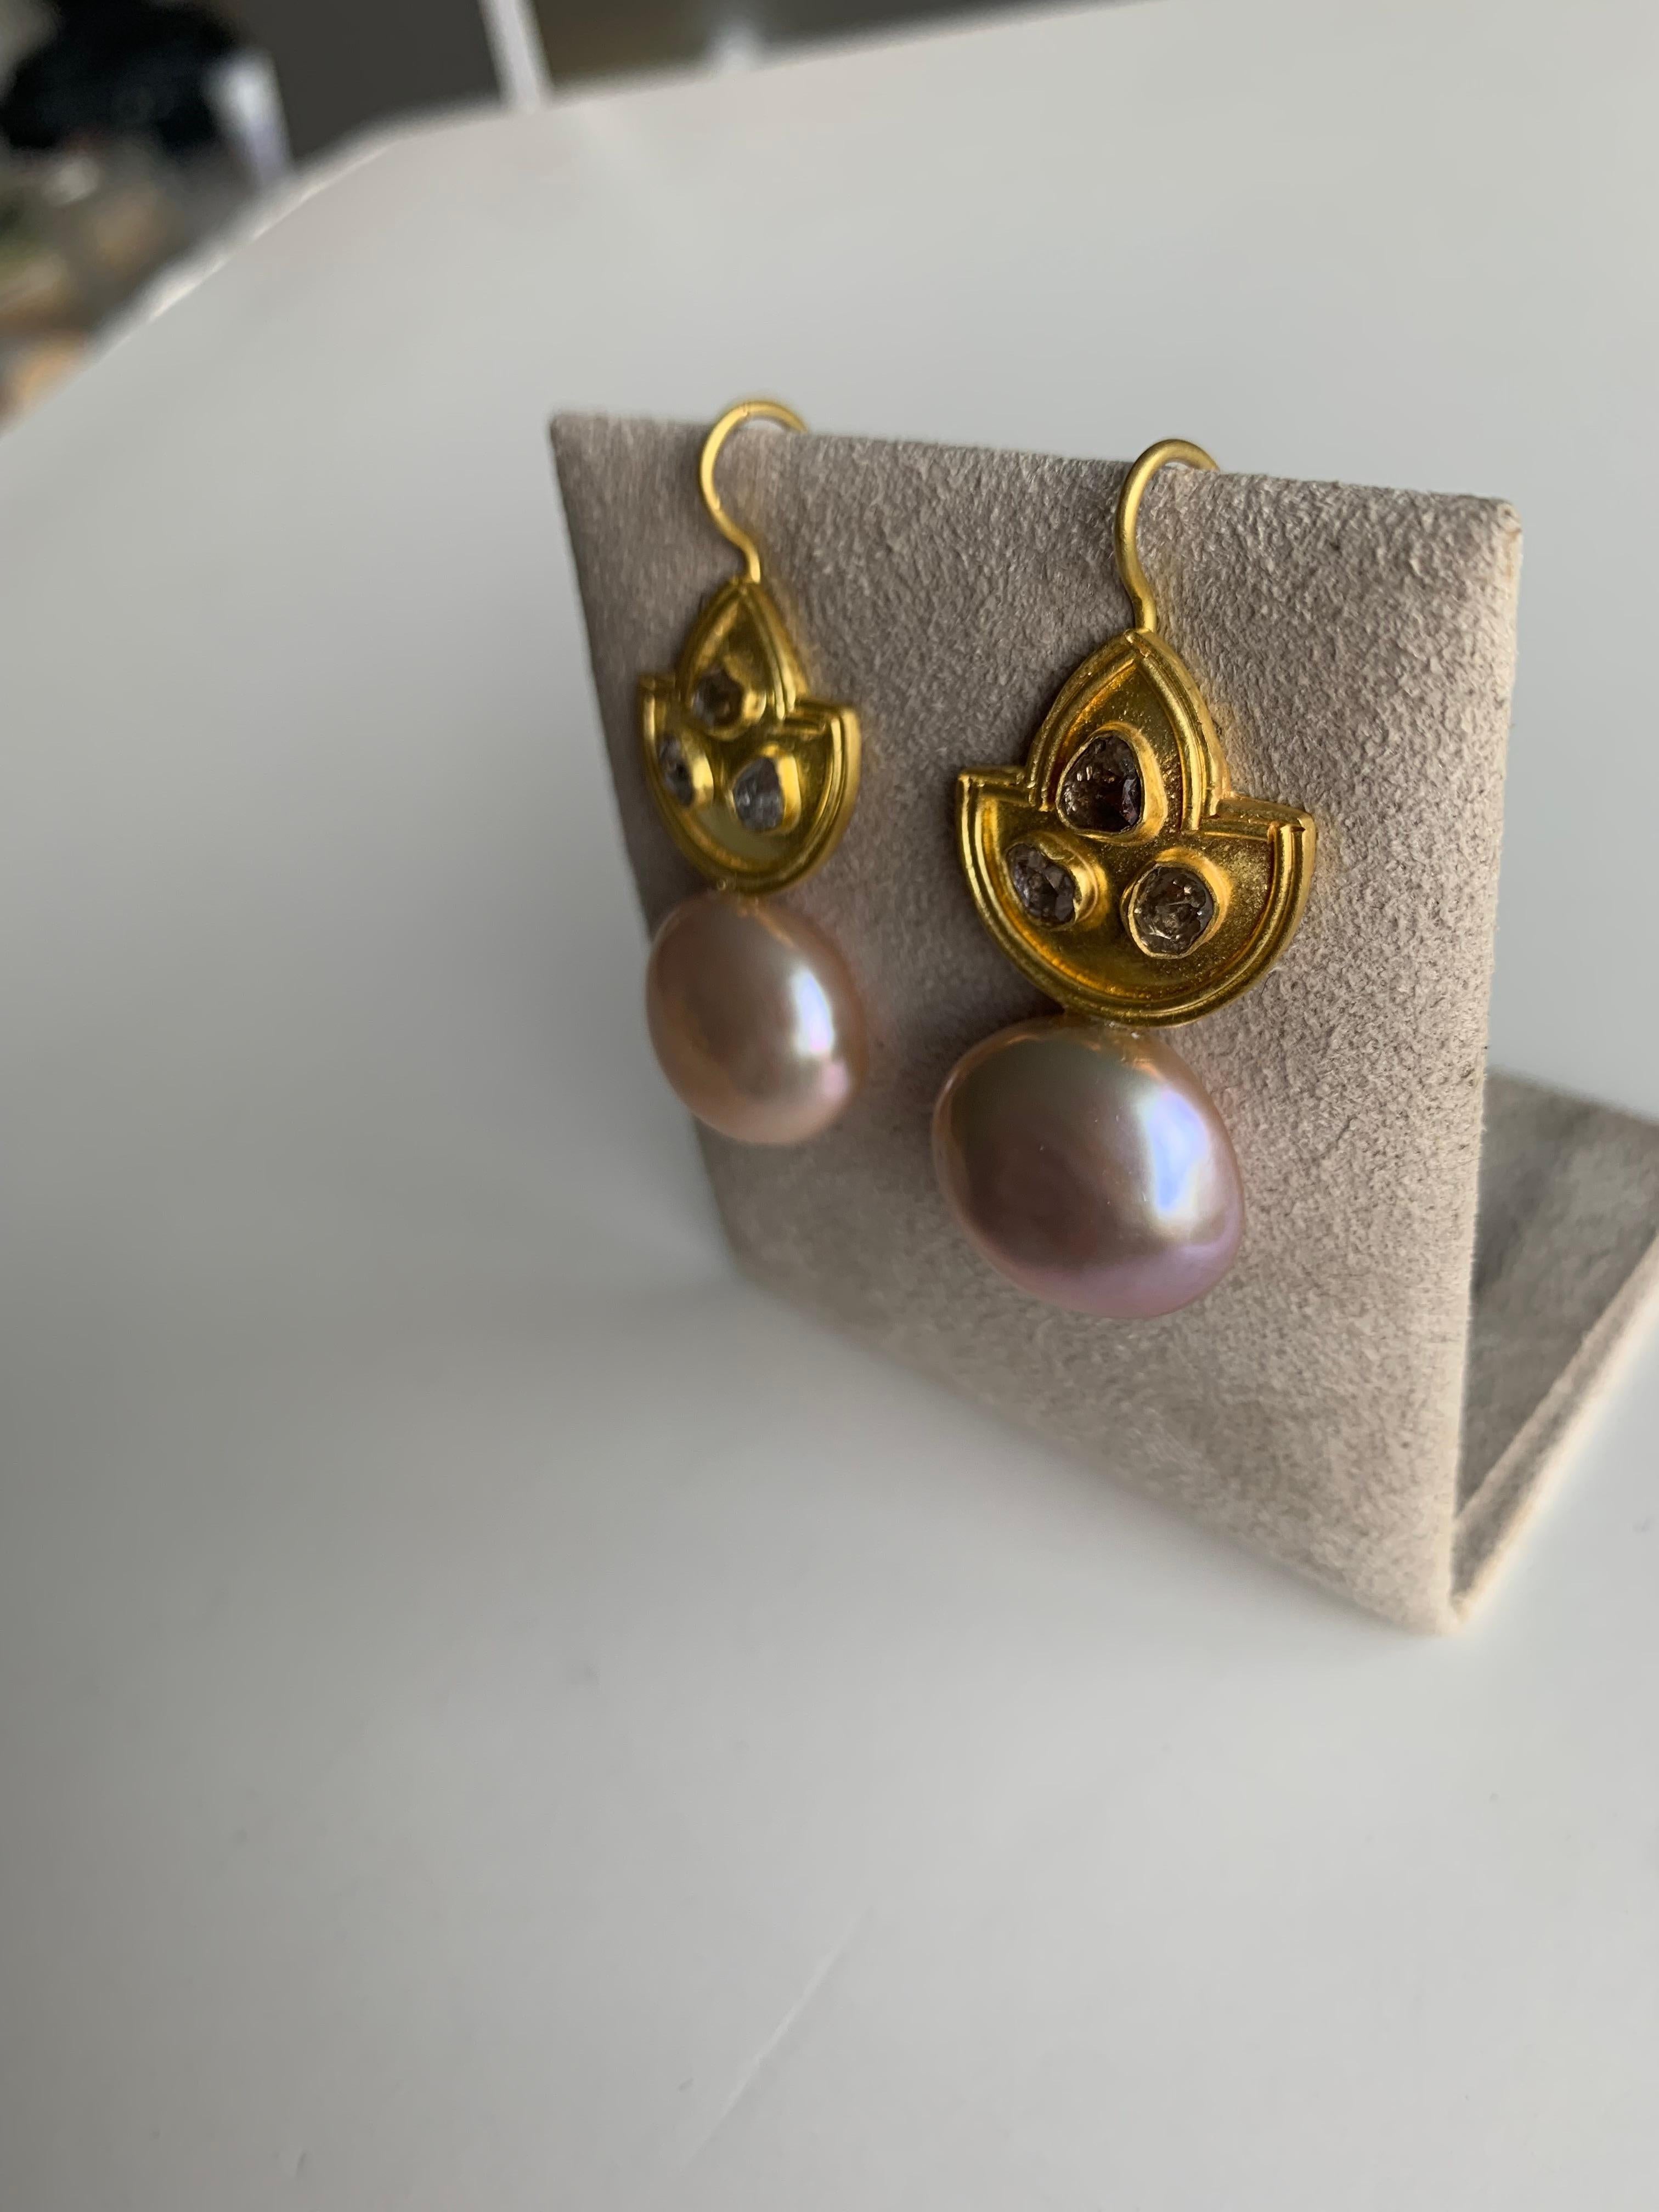 Artist Blush Pearls and Rose Cut Diamond Earrings in 22Karat Gold For Sale